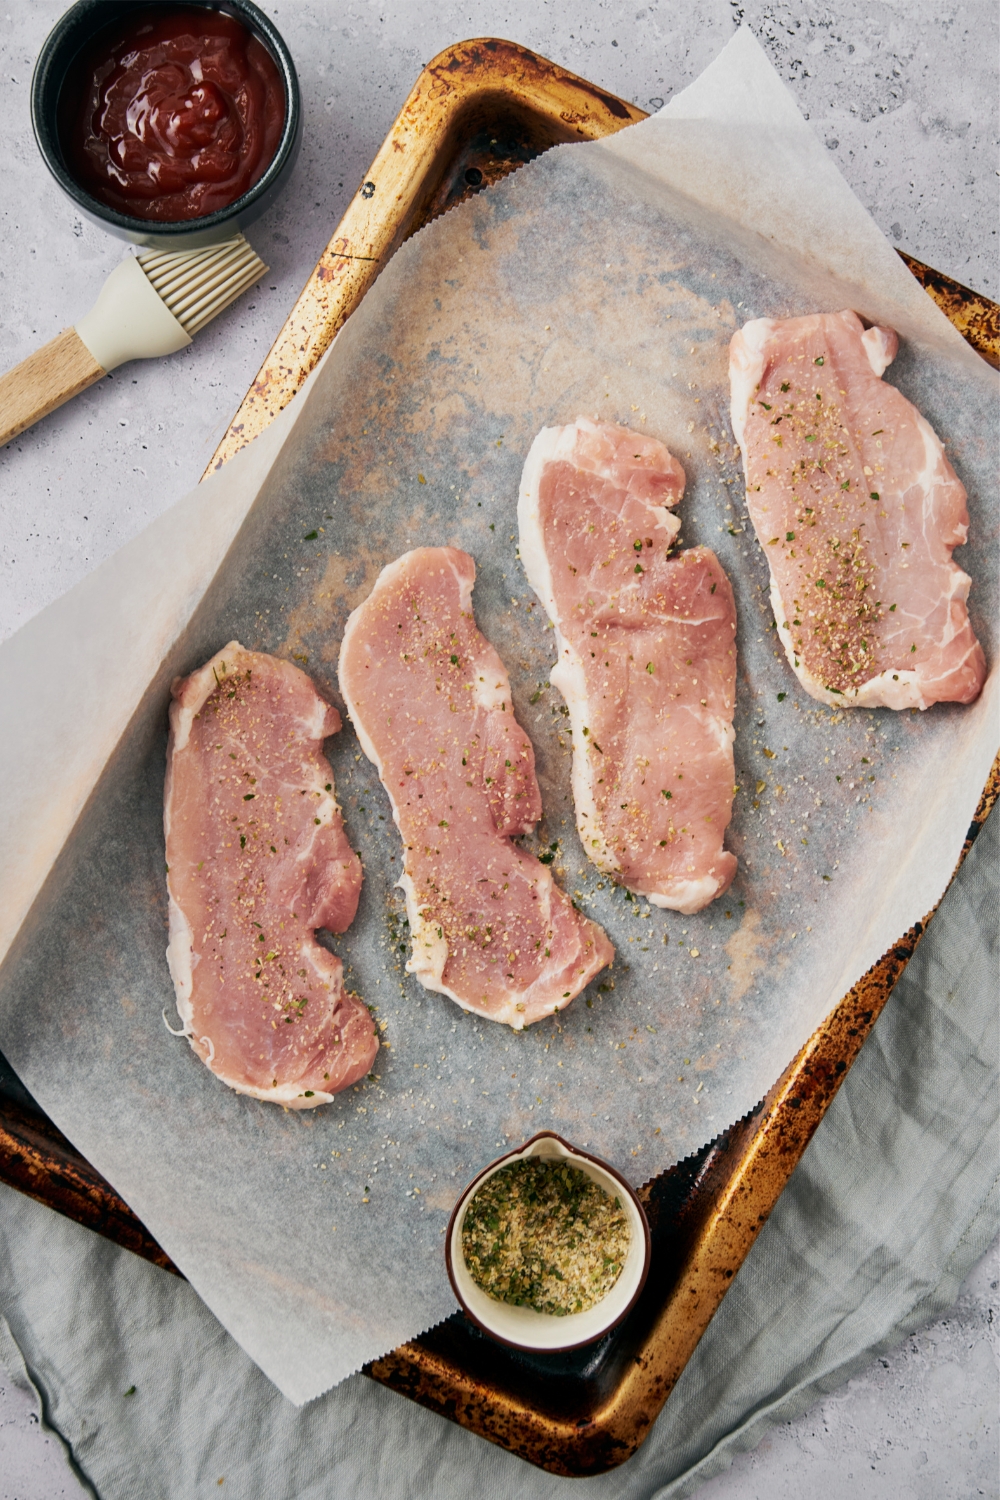 Four raw pork chops on a parchment paper lined baking sheet.